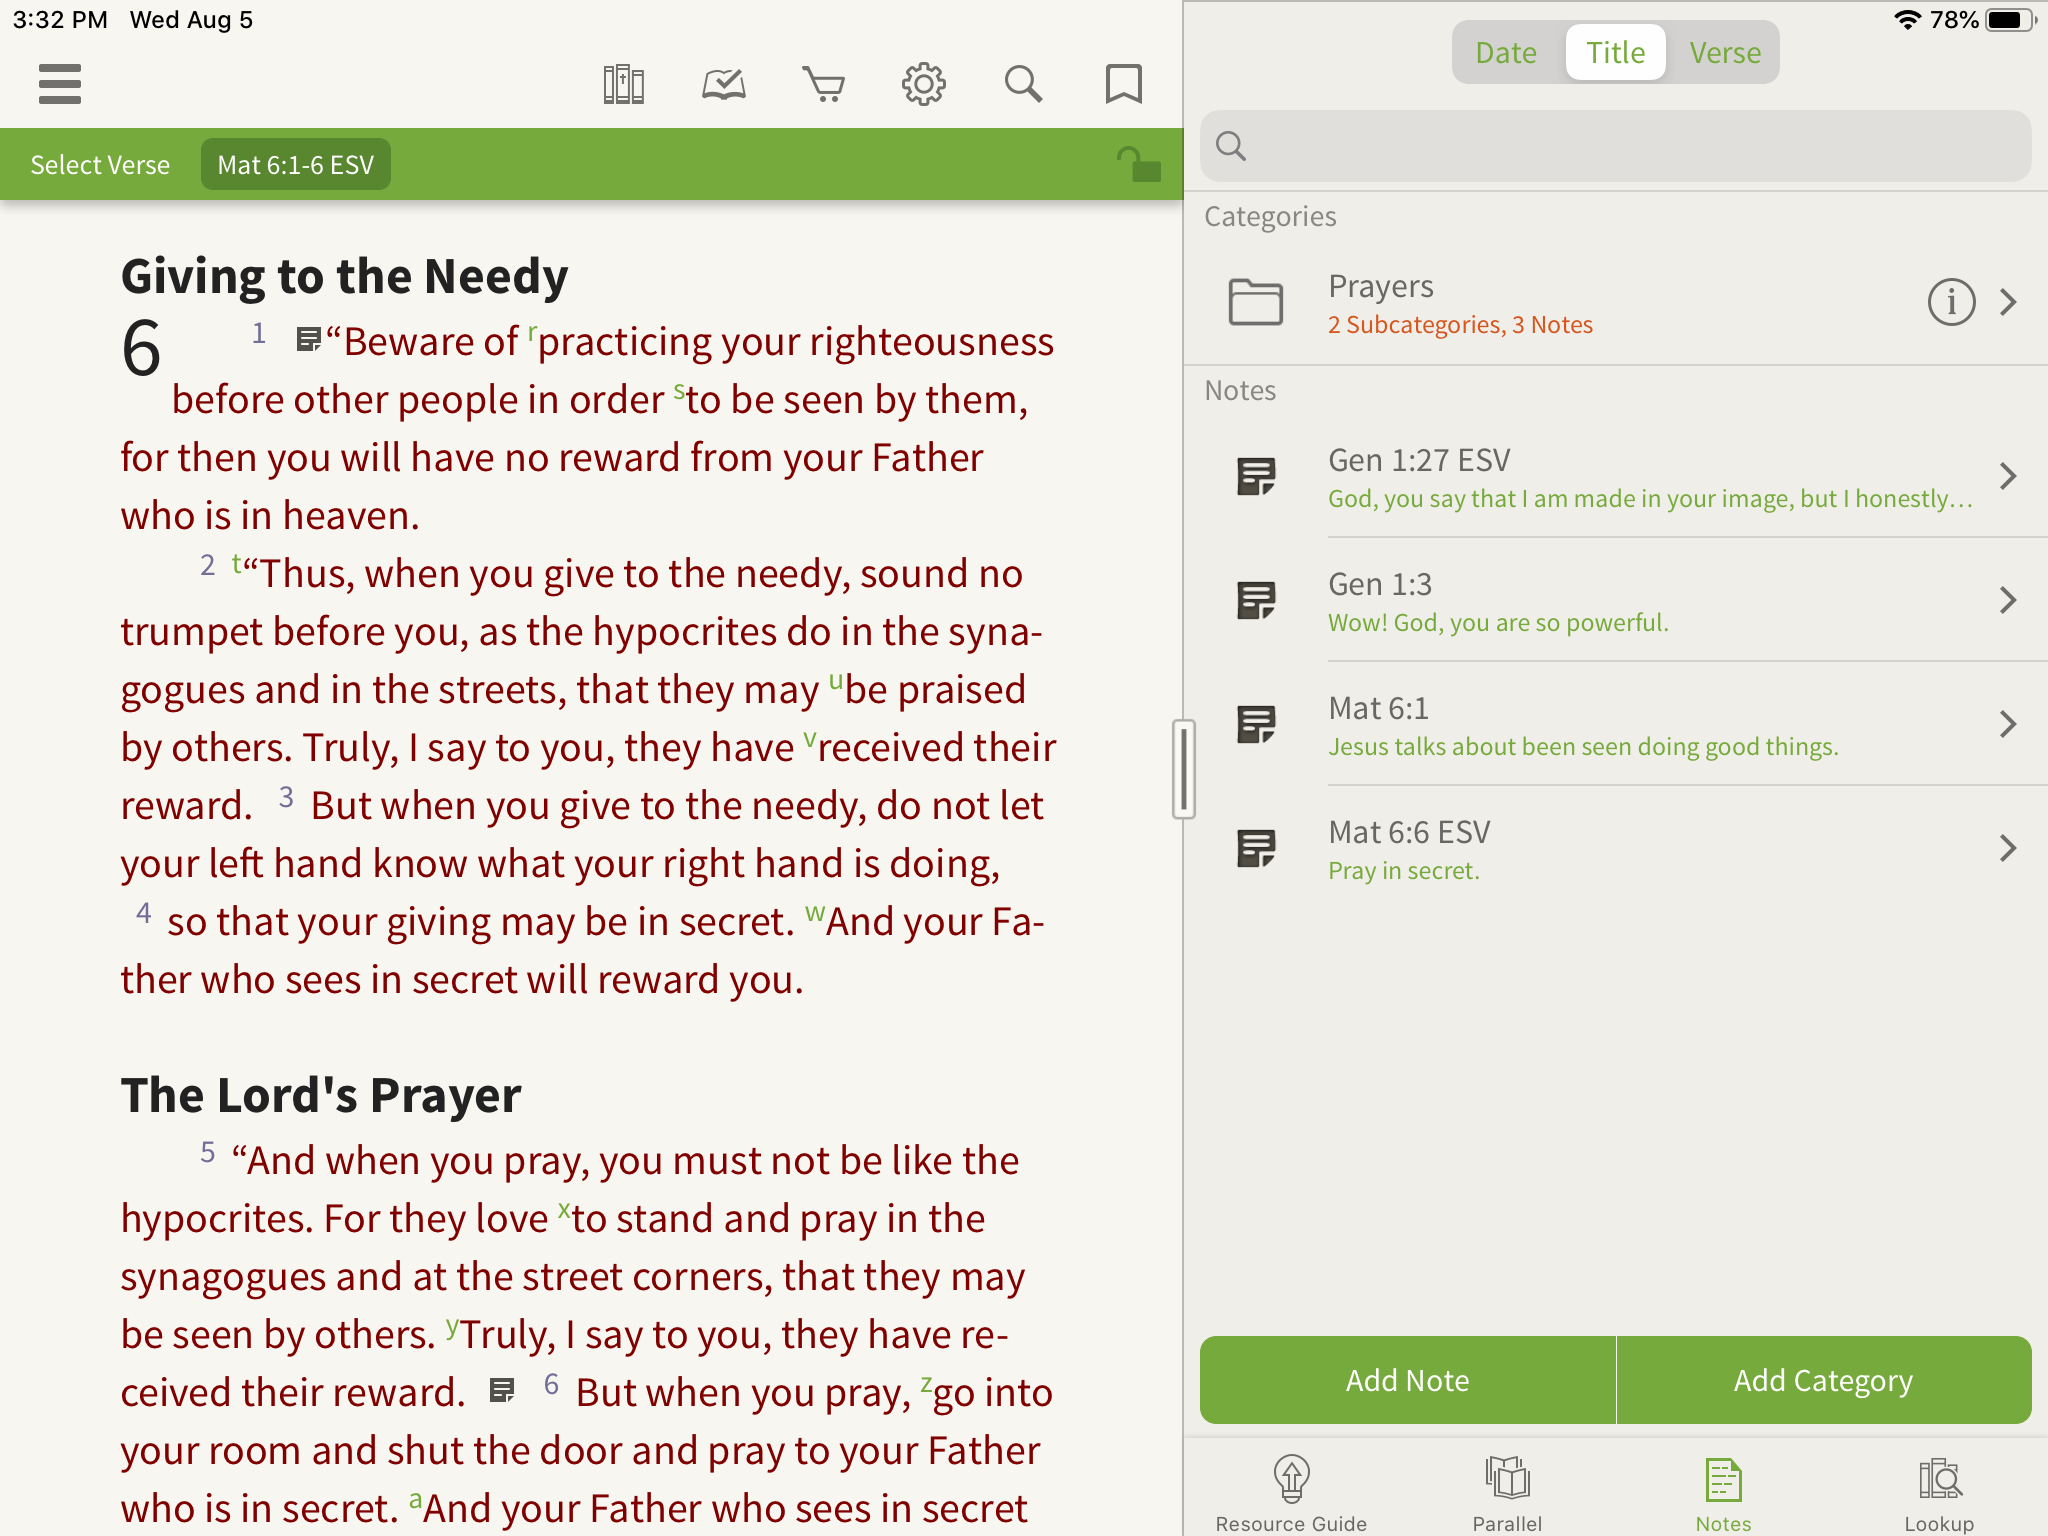 organizing notes in the olive tree bible app